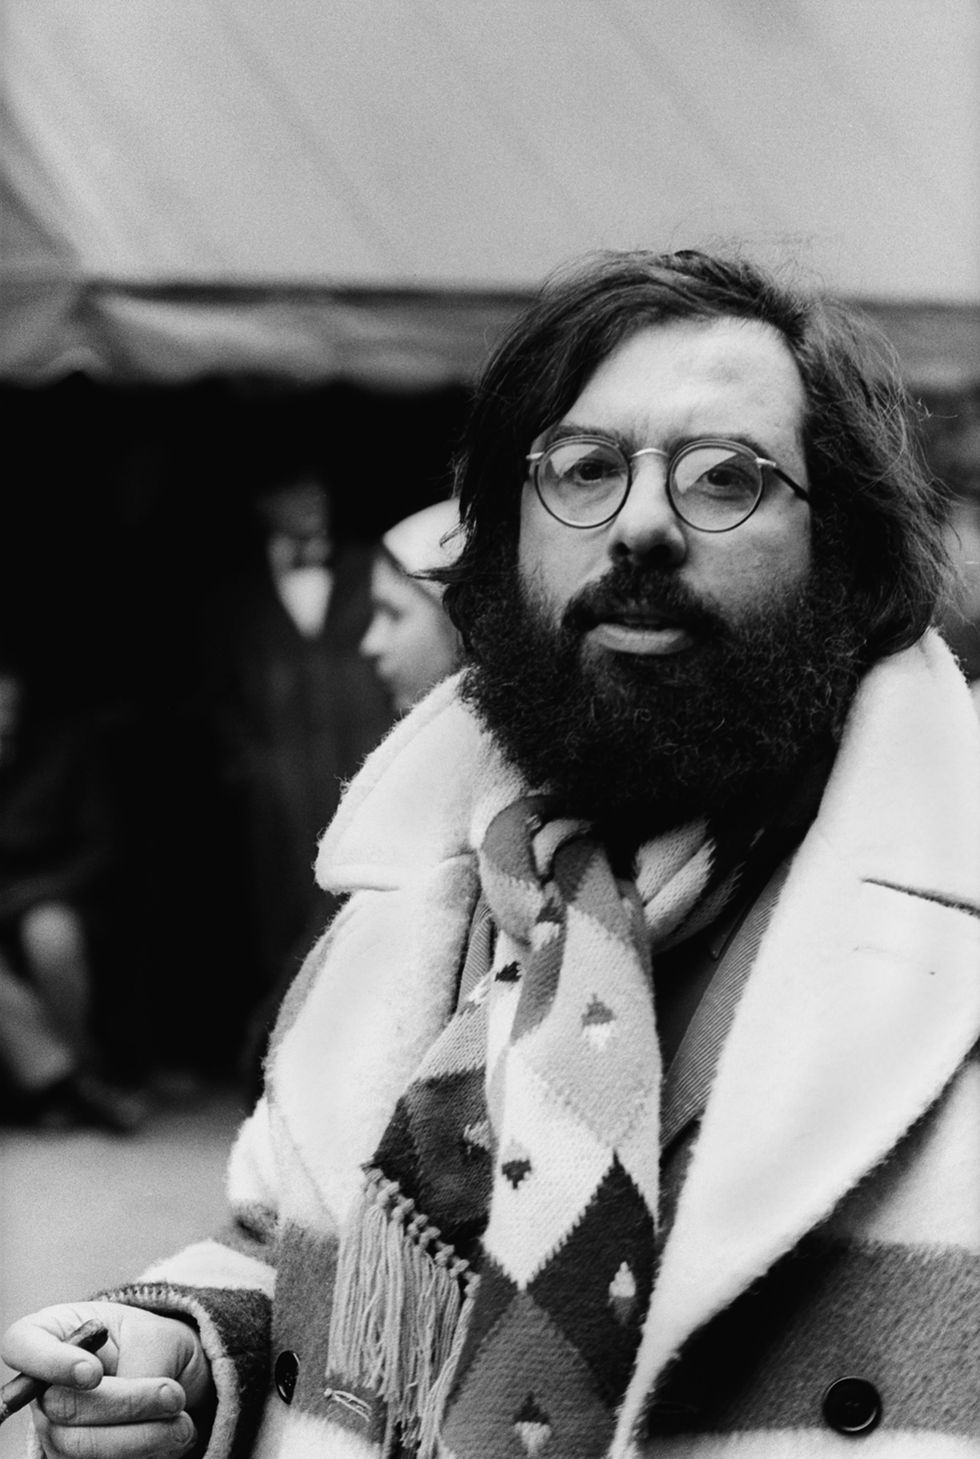 francis ford coppola on the godfather ii set